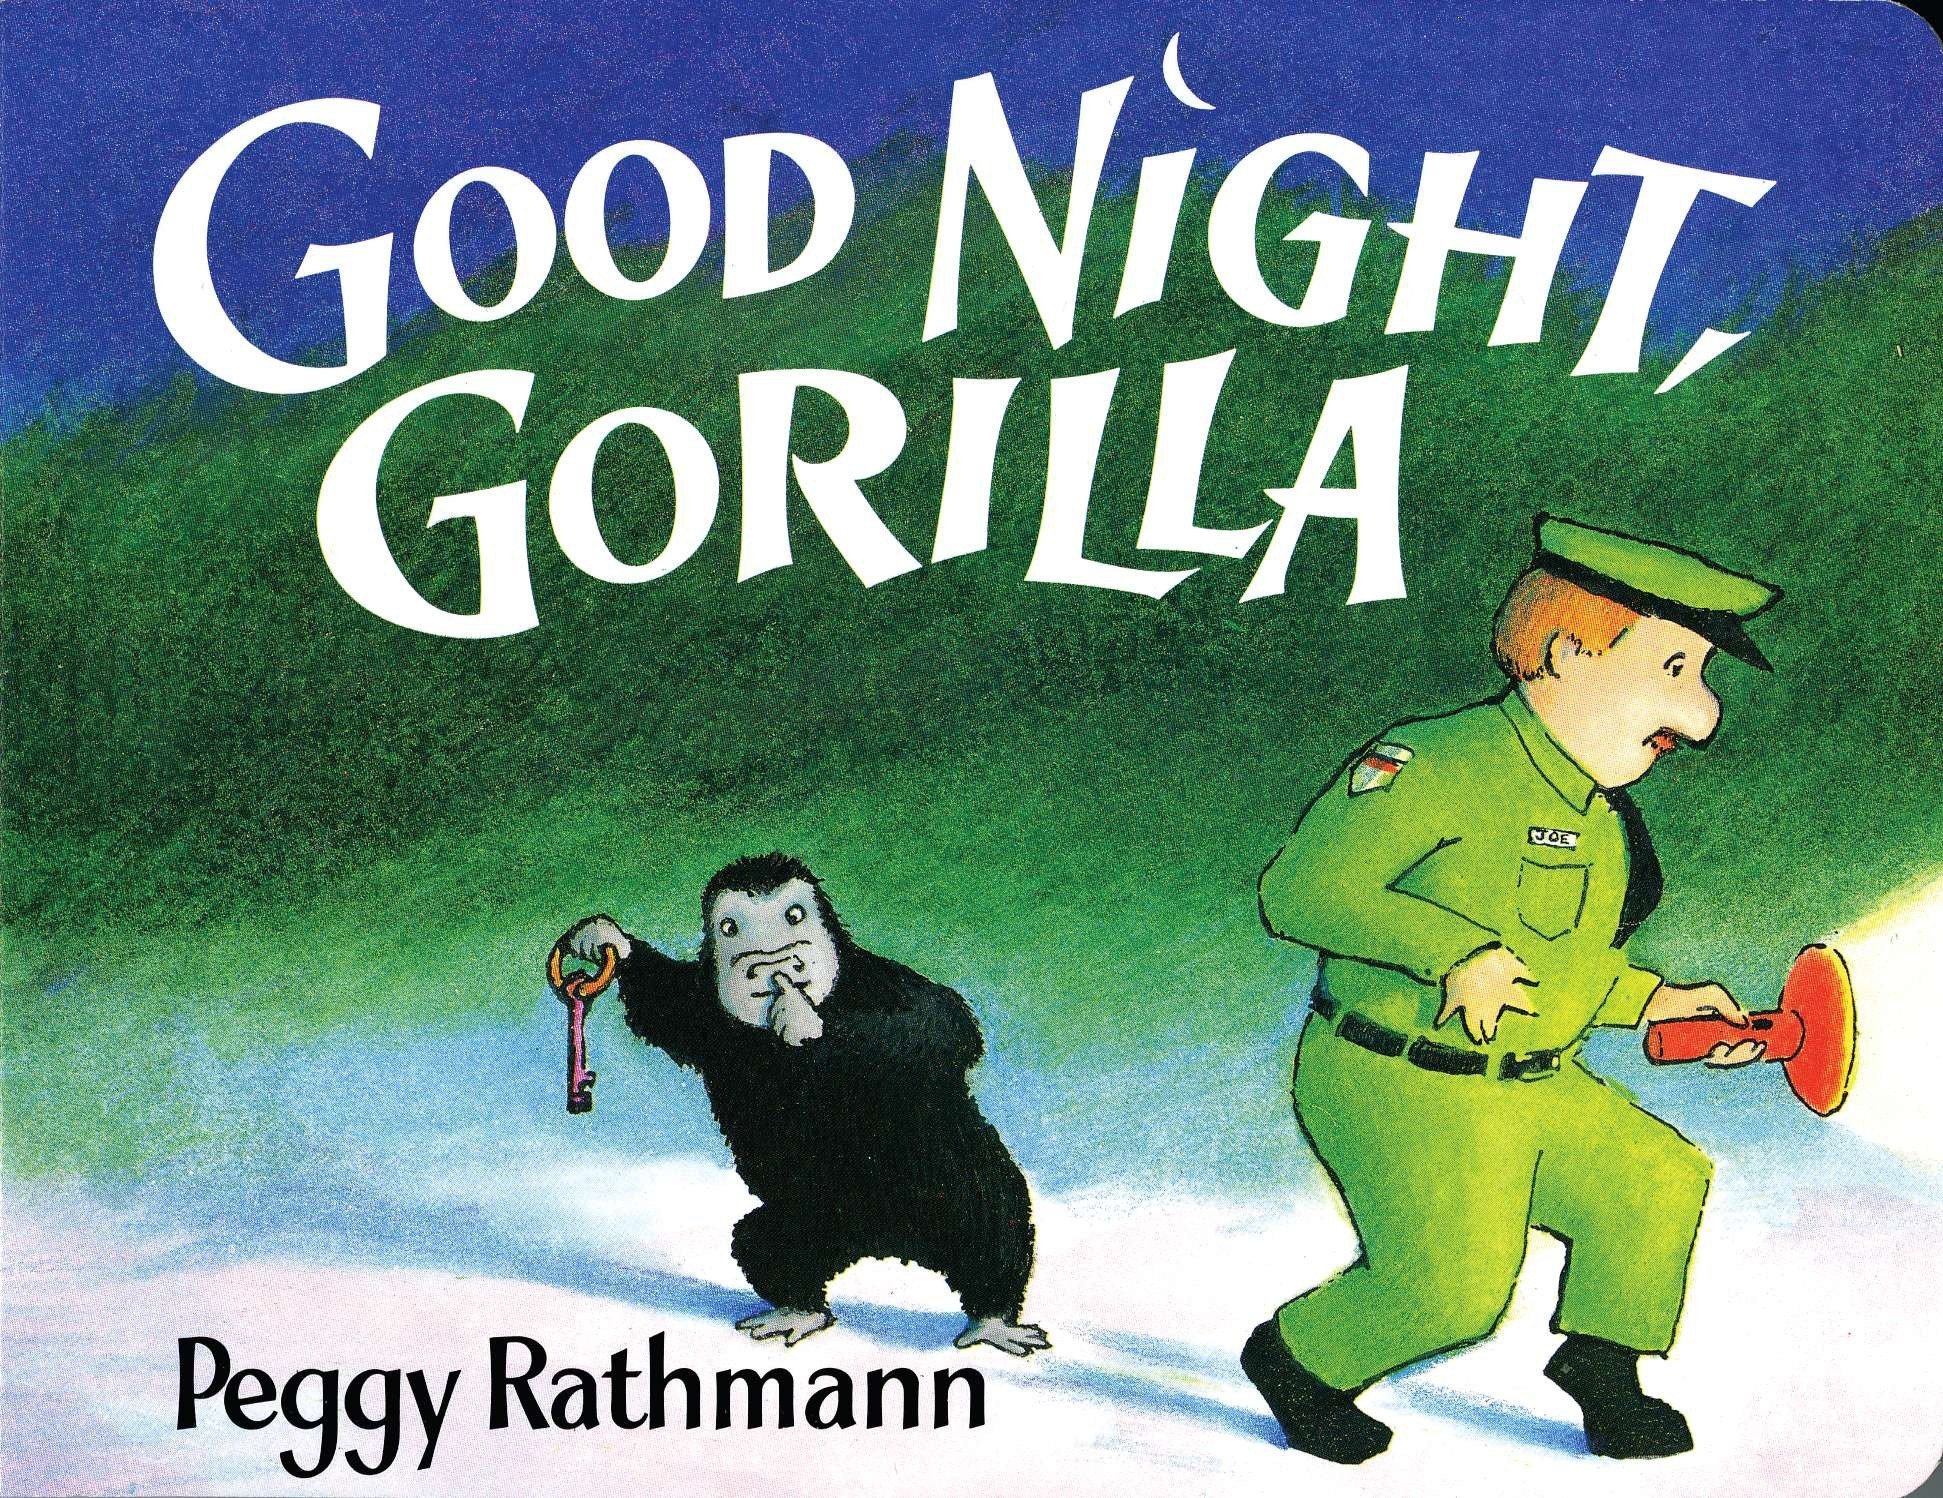 Cover of Good Night, Gorilla | A white male zookeeper is tiptoeing to the right.  He has red hair and a mustache in addition to a red flashlight that is turned on.  The zookeeper is dressed in green.  A small gorilla is behind the zookeeper.  This gorilla holds the keys of the zookeeper and puts a finger to their lips asking the reader to be silent.  